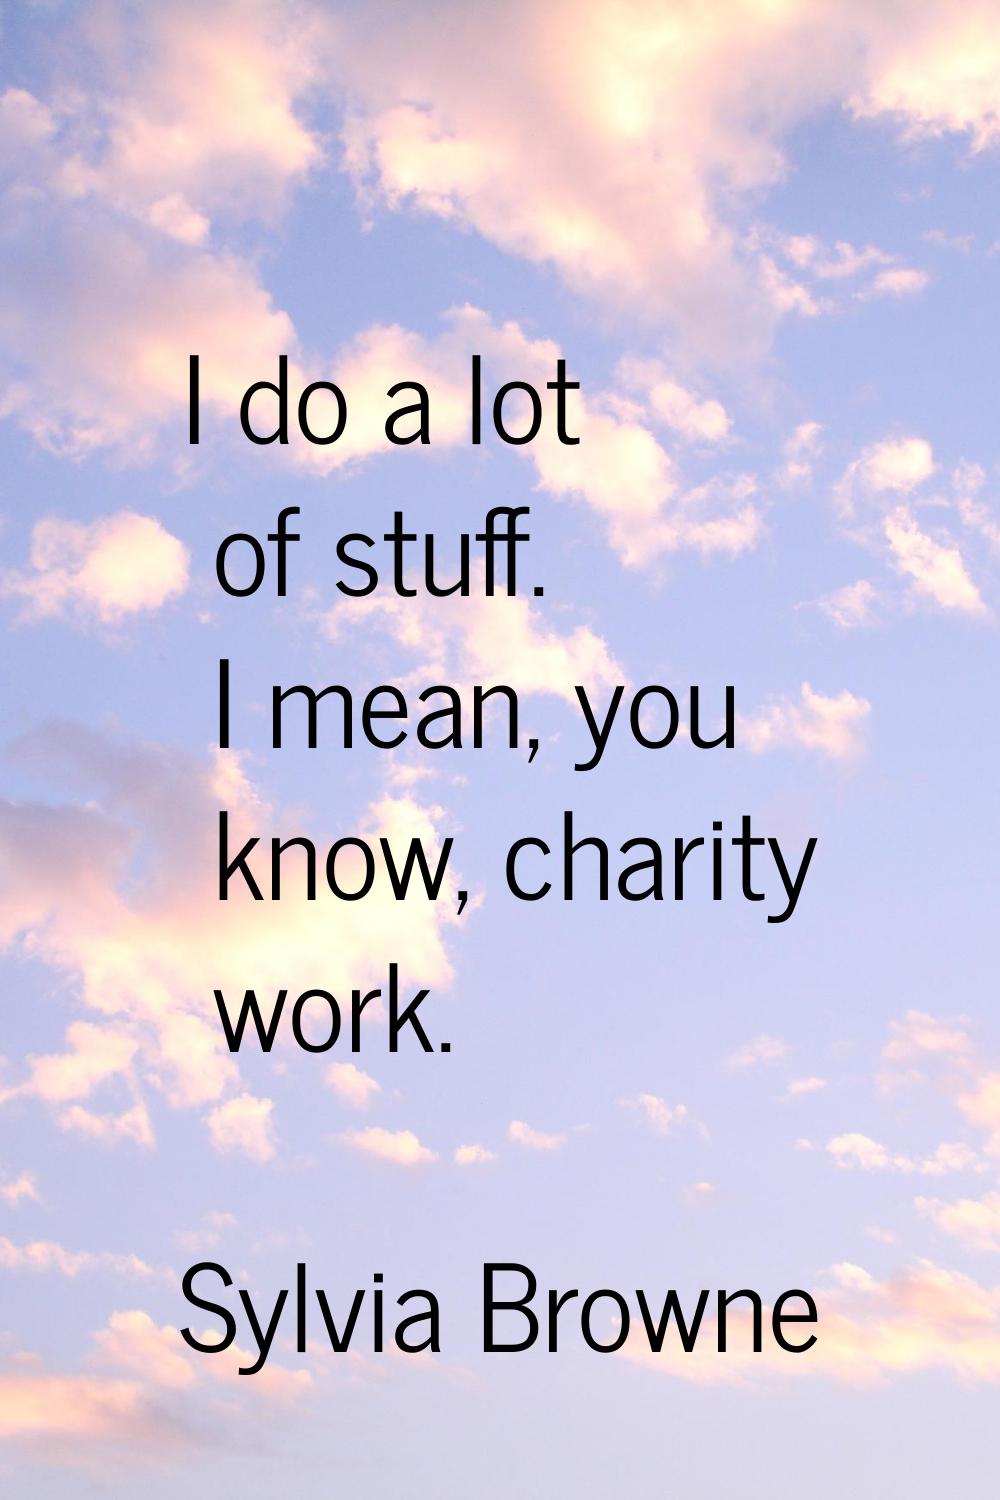 I do a lot of stuff. I mean, you know, charity work.